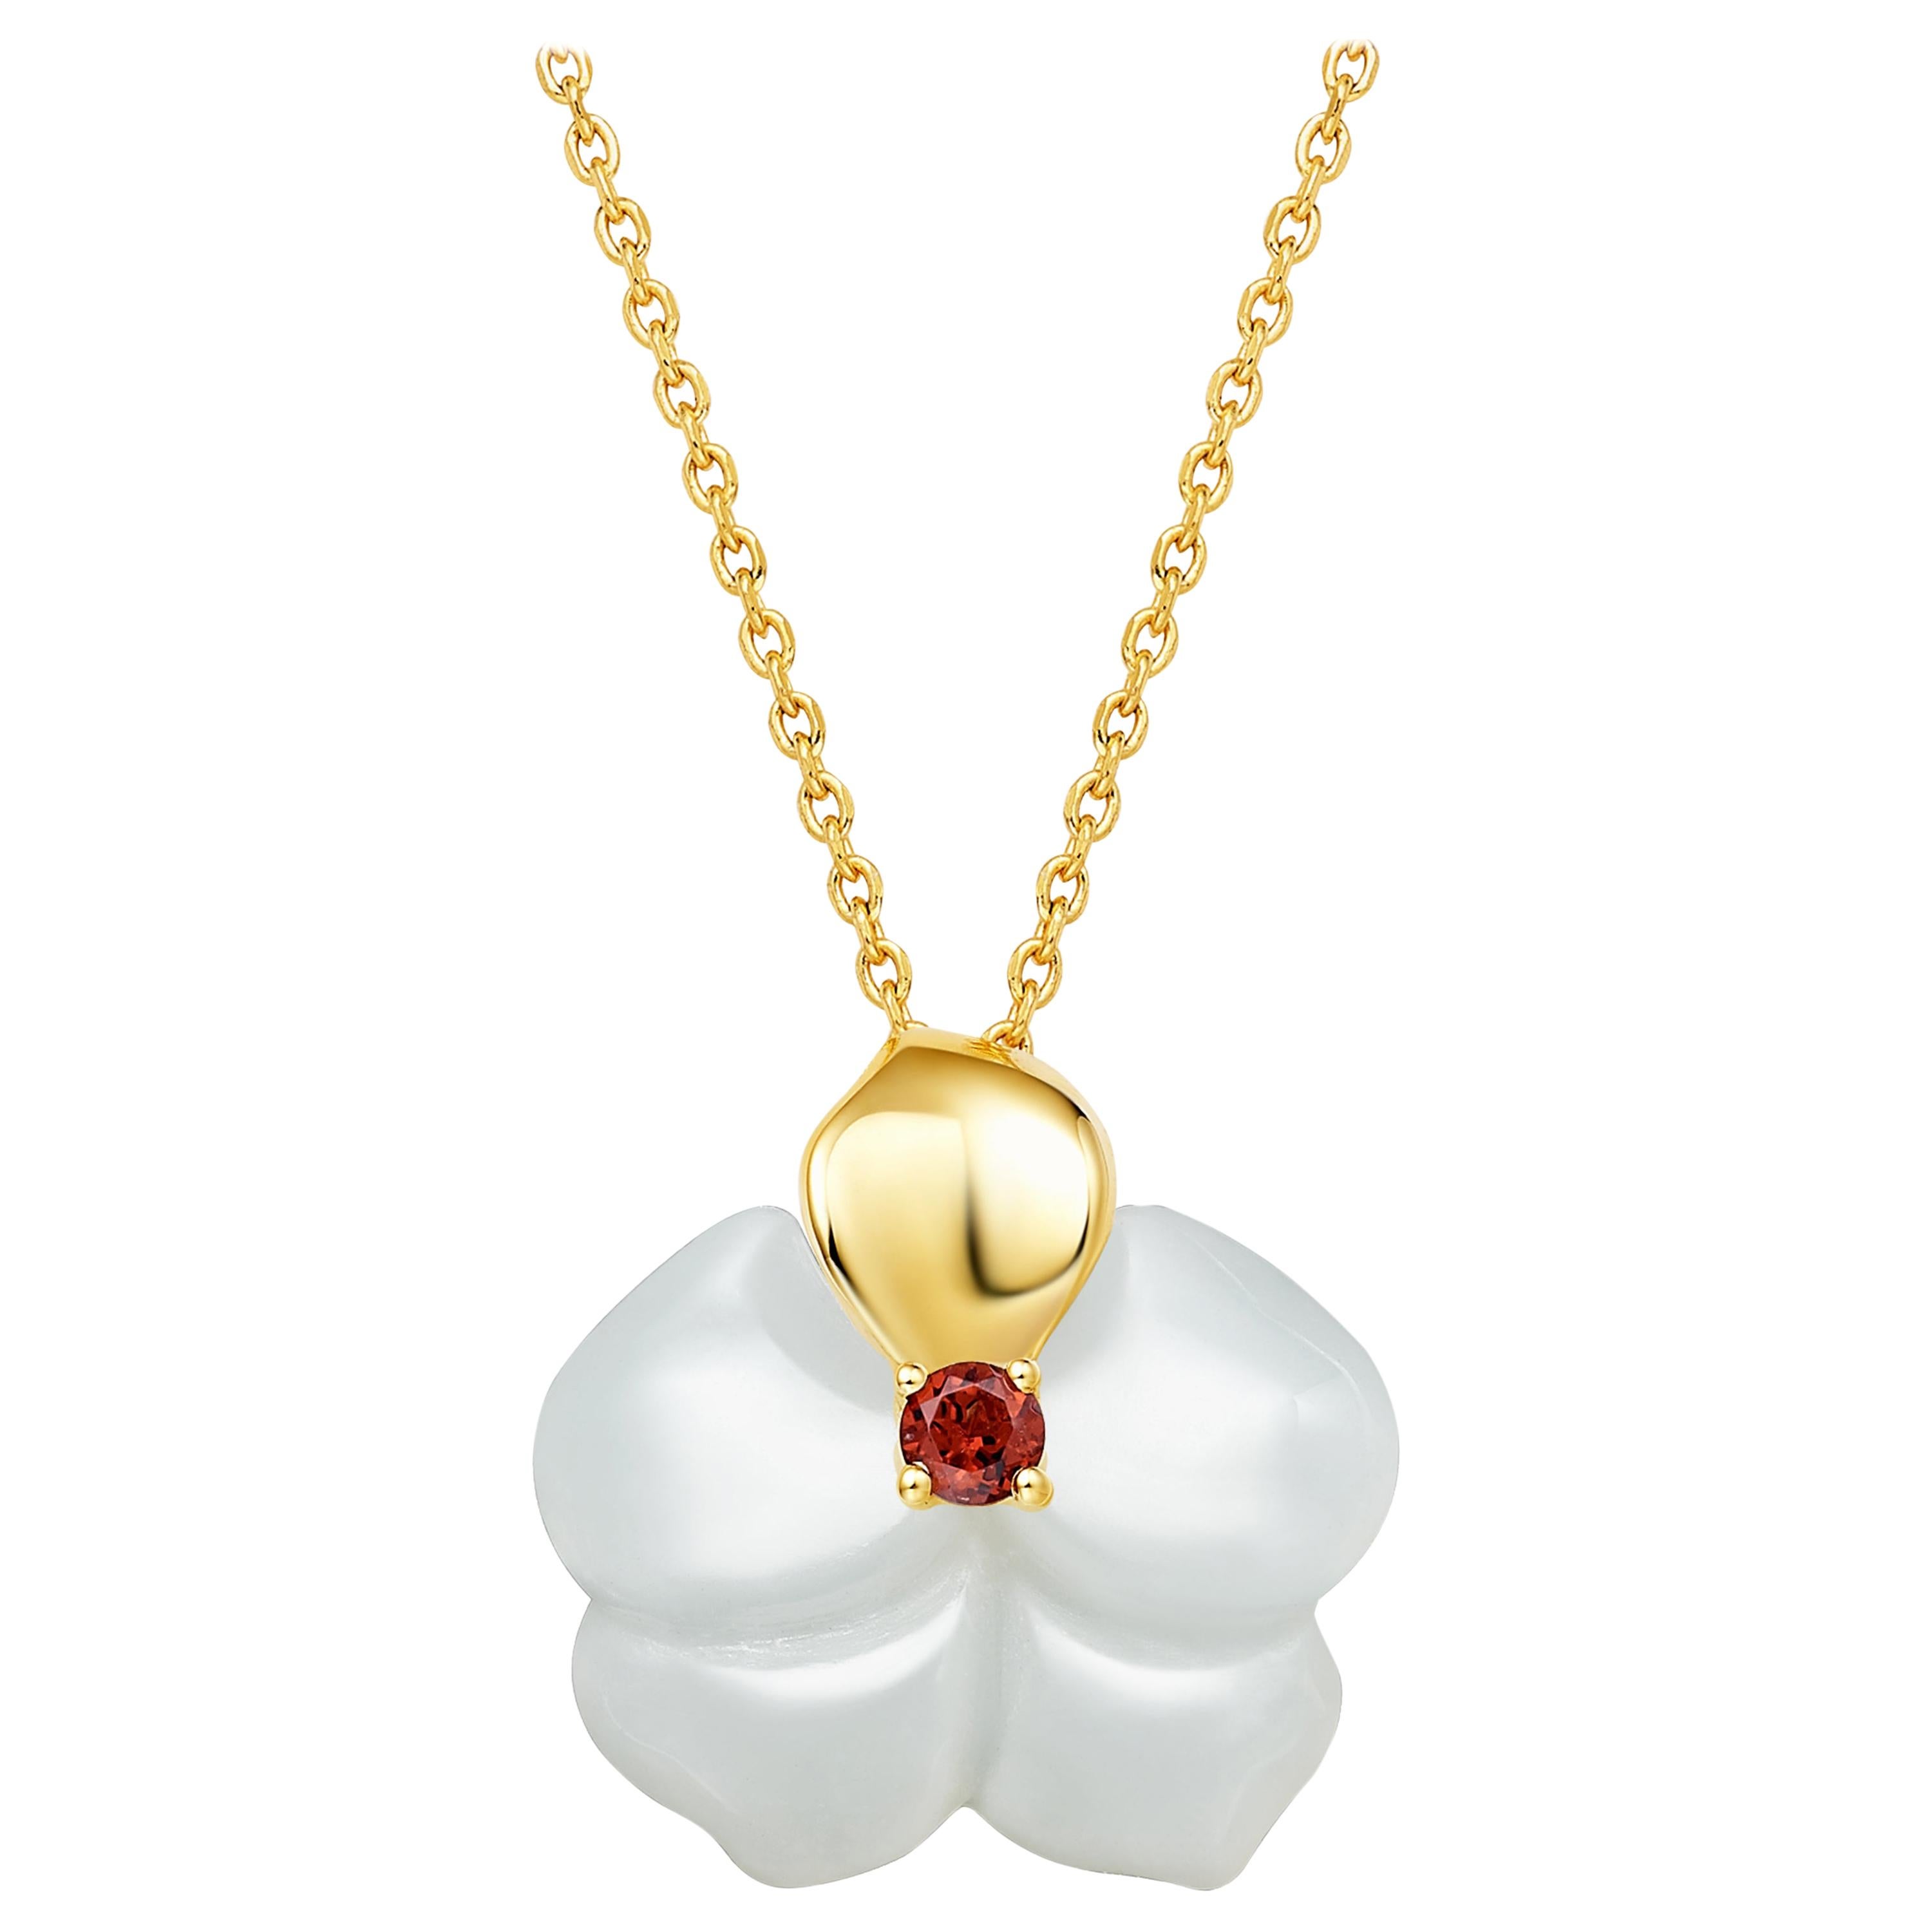 Fei Liu Russian Nephrite Orchid Garnet 14 Carat Yellow Gold Pendant Necklace For Sale